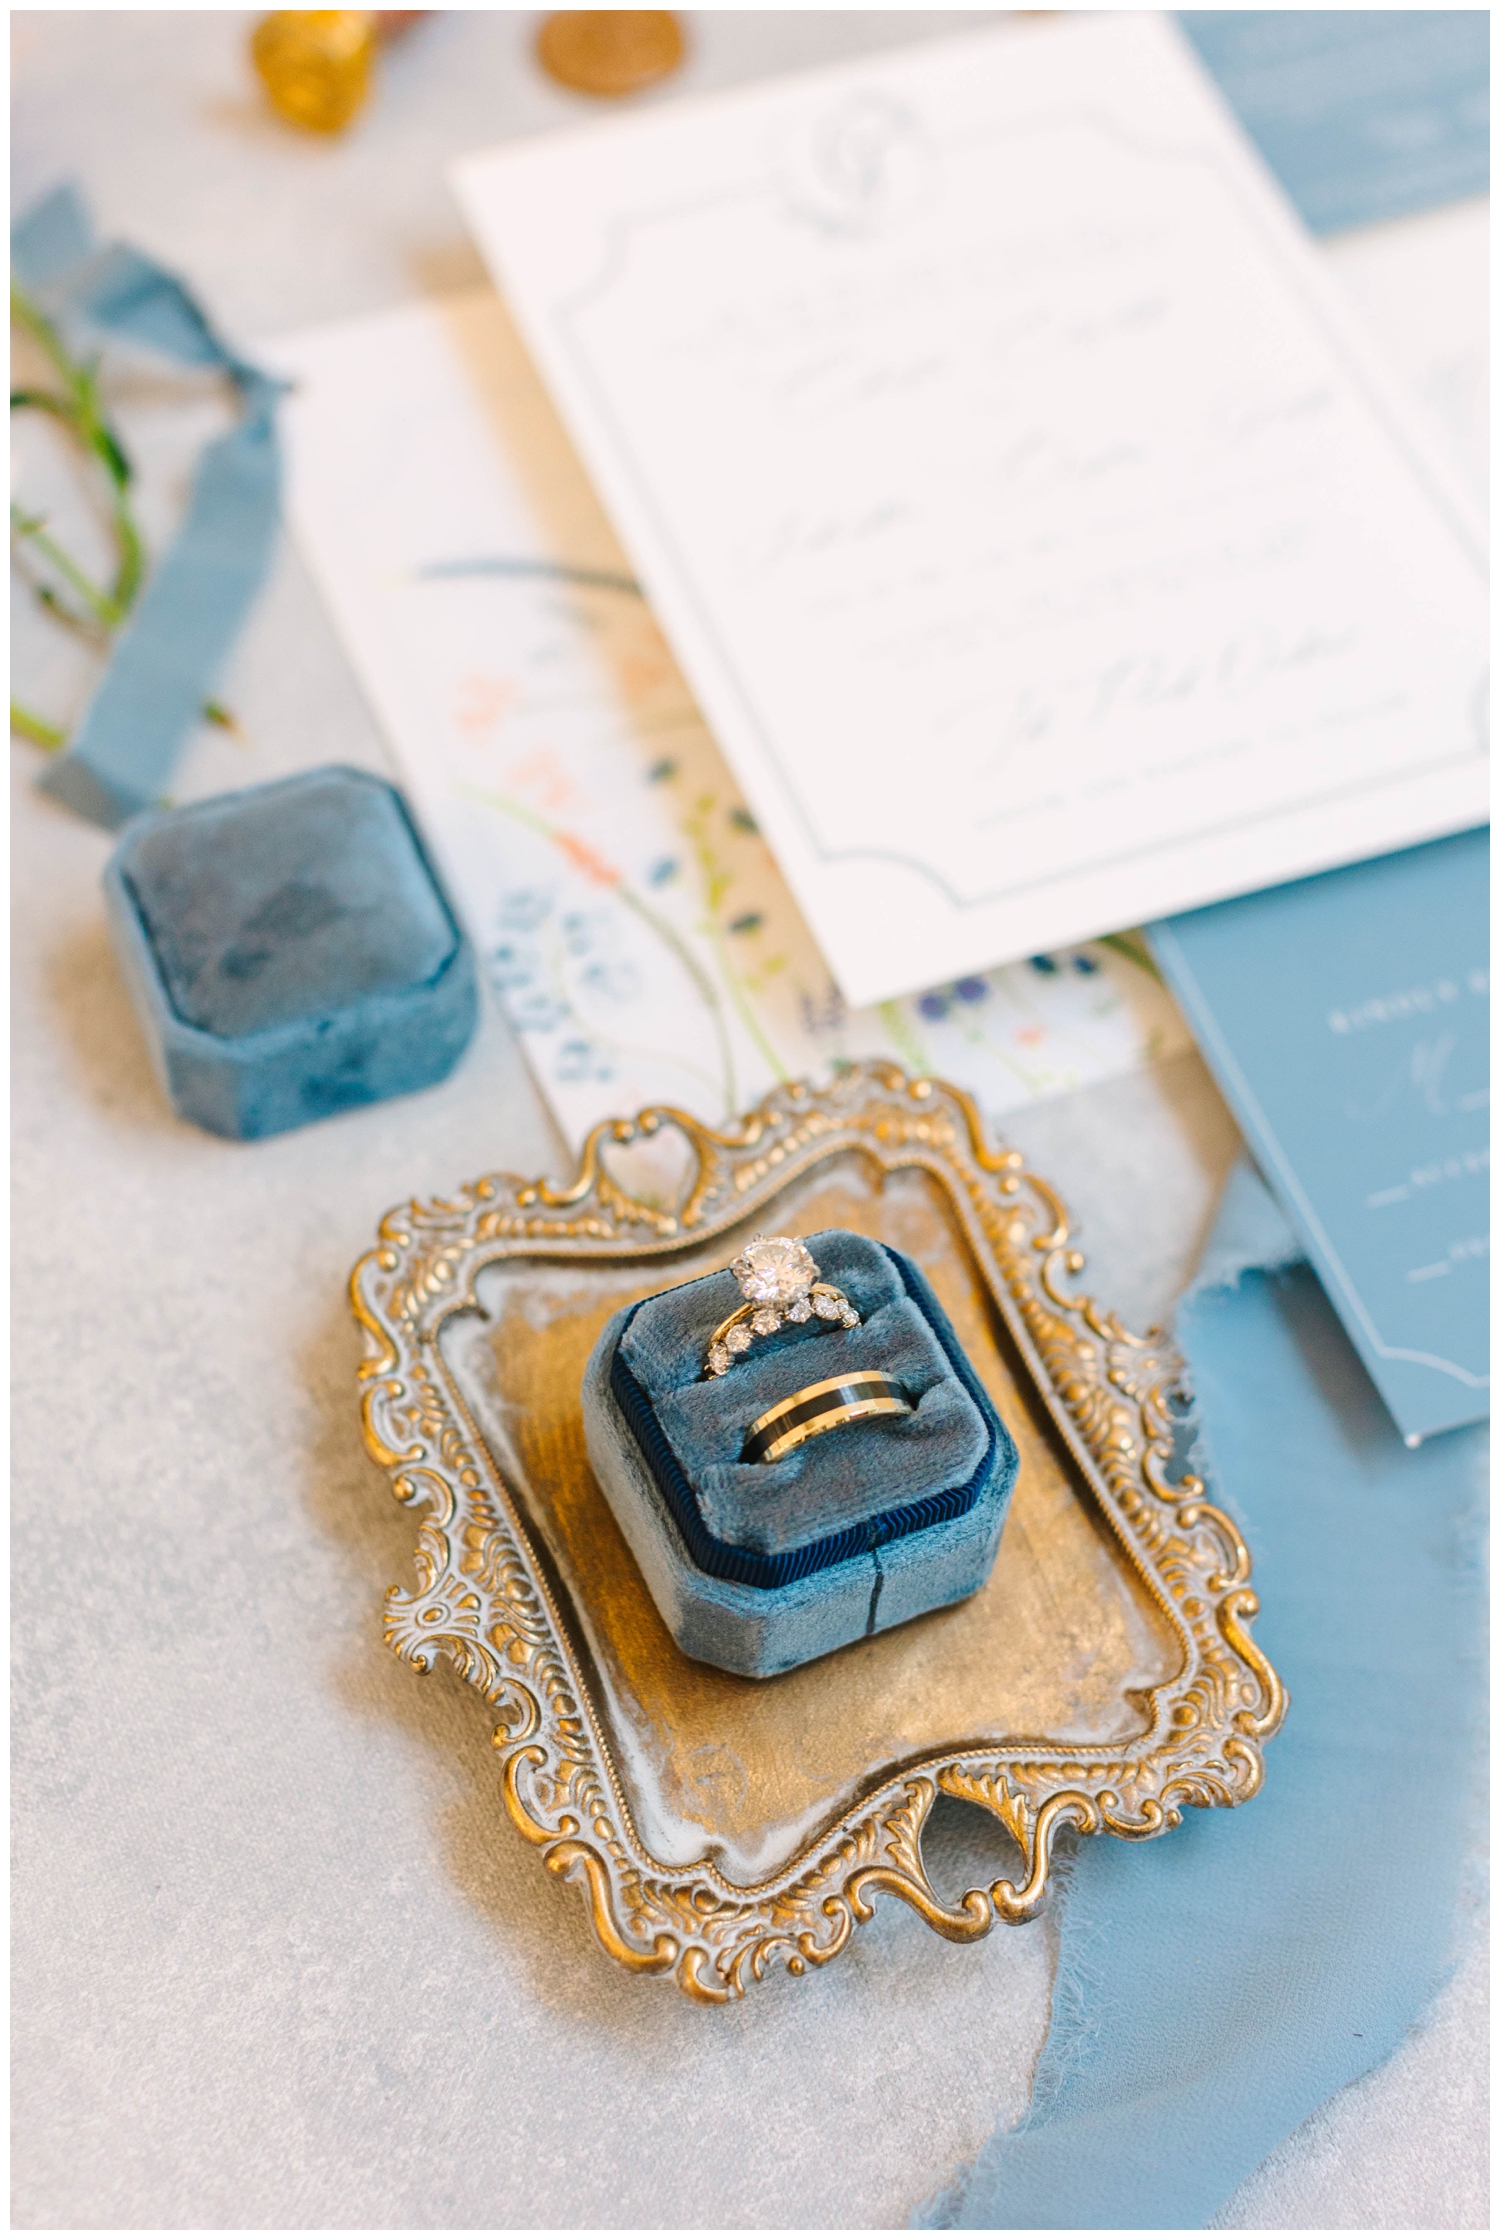 flaylat of wedding ring in blue ring box on gold tray